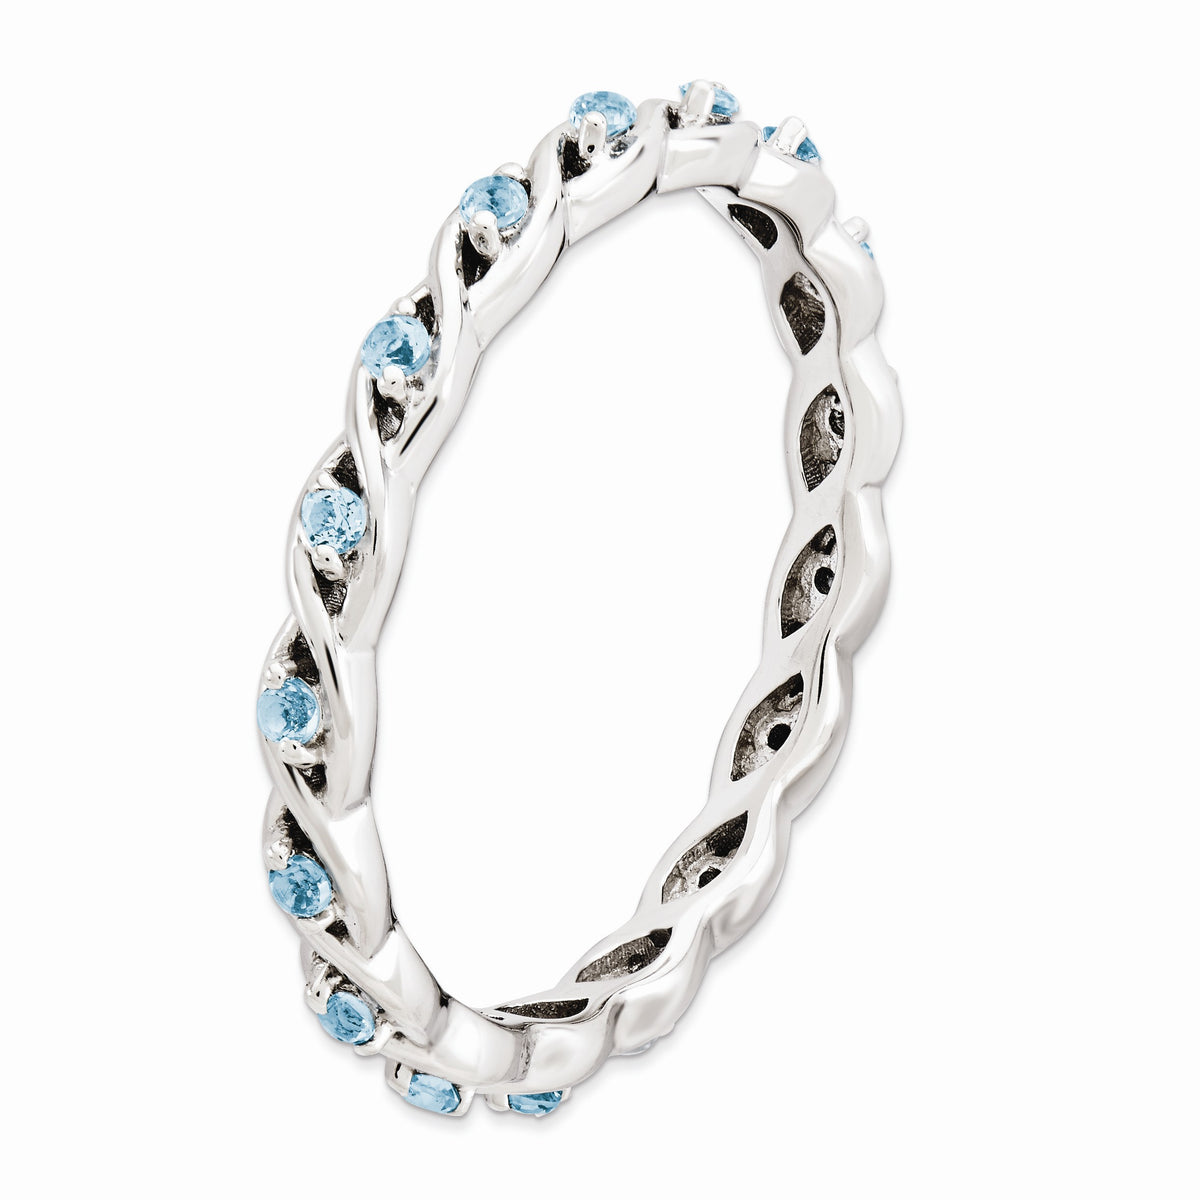 Alternate view of the 2.5mm Rhodium Plated Sterling Silver Stackable Blue Topaz Twist Band by The Black Bow Jewelry Co.